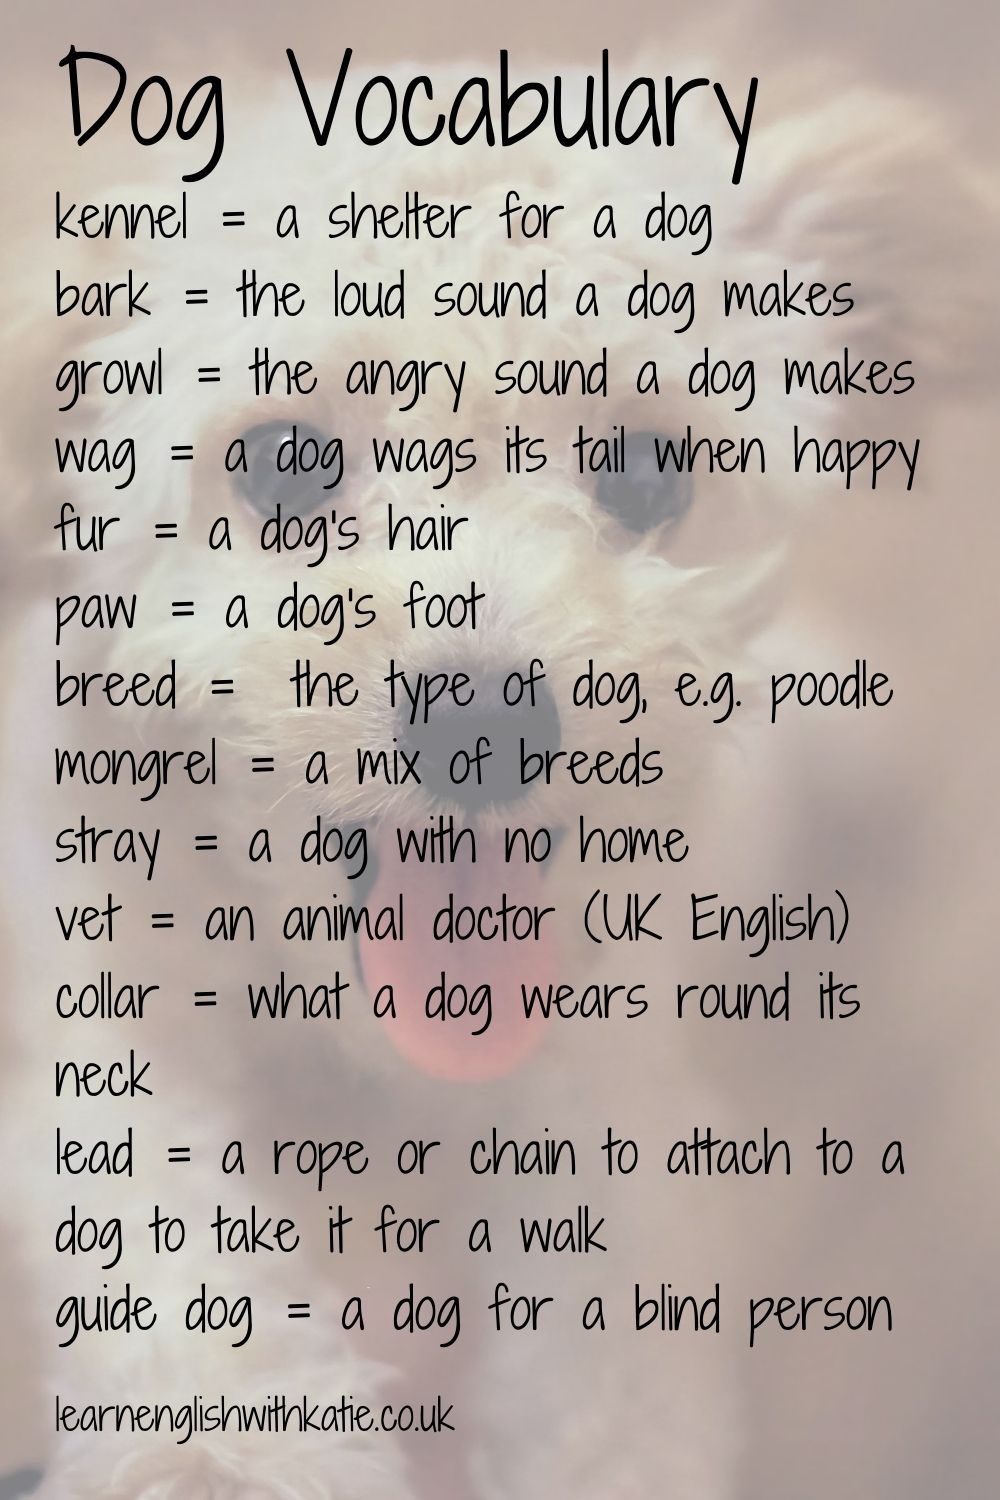 Pinterest pin showing an image of a dog and a list of dog vocabulary